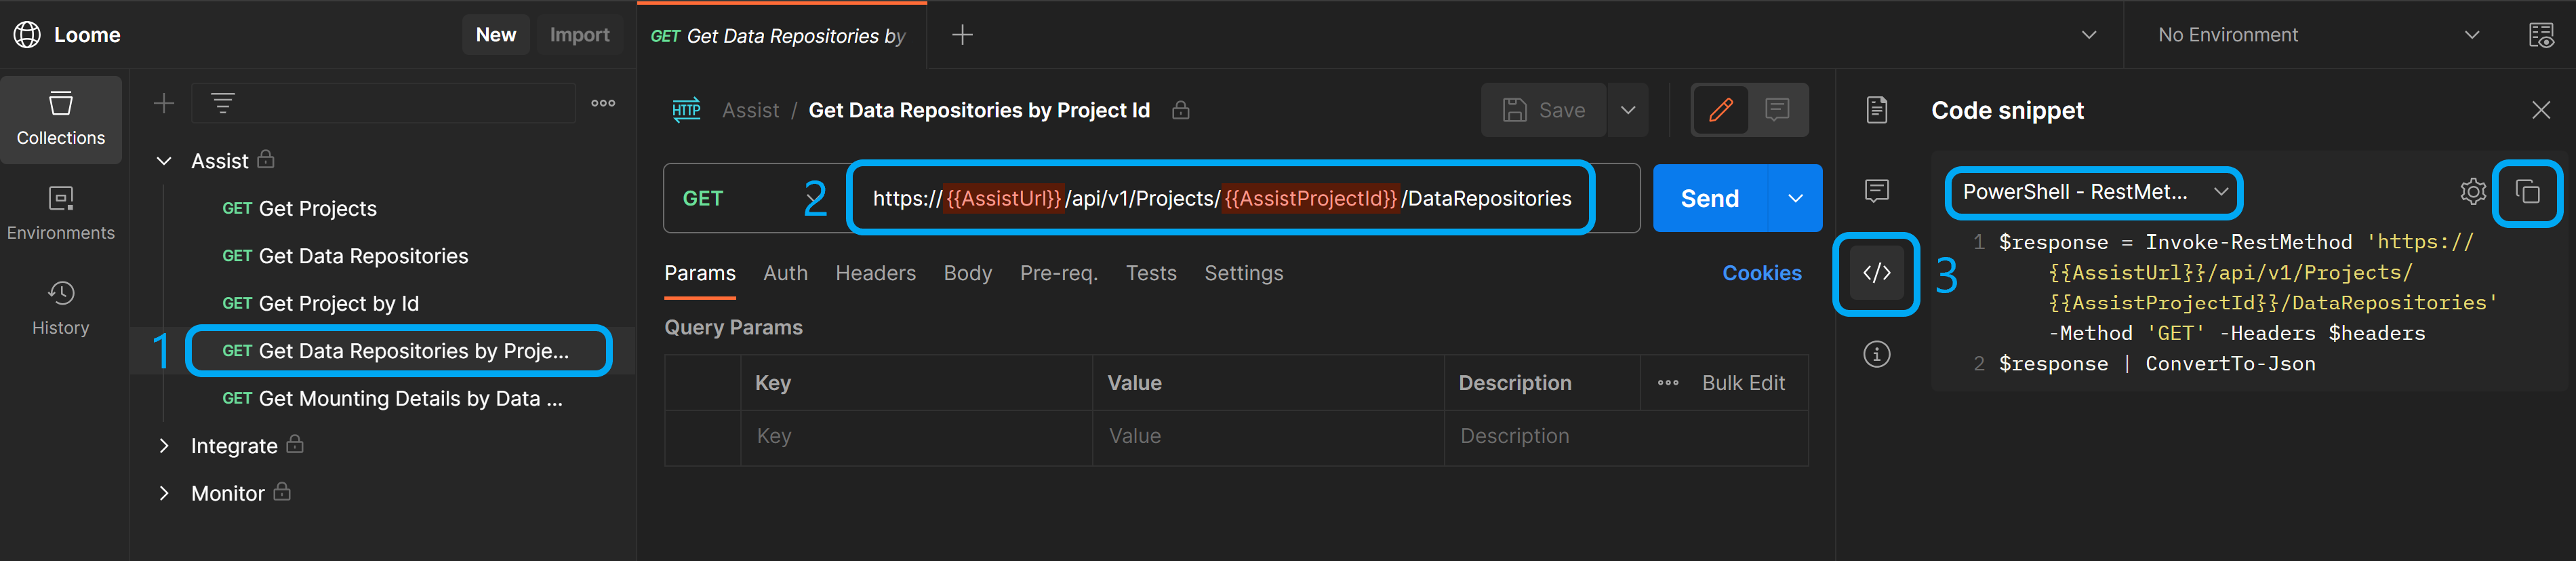 Get Data Repositories by Project Id endpoint